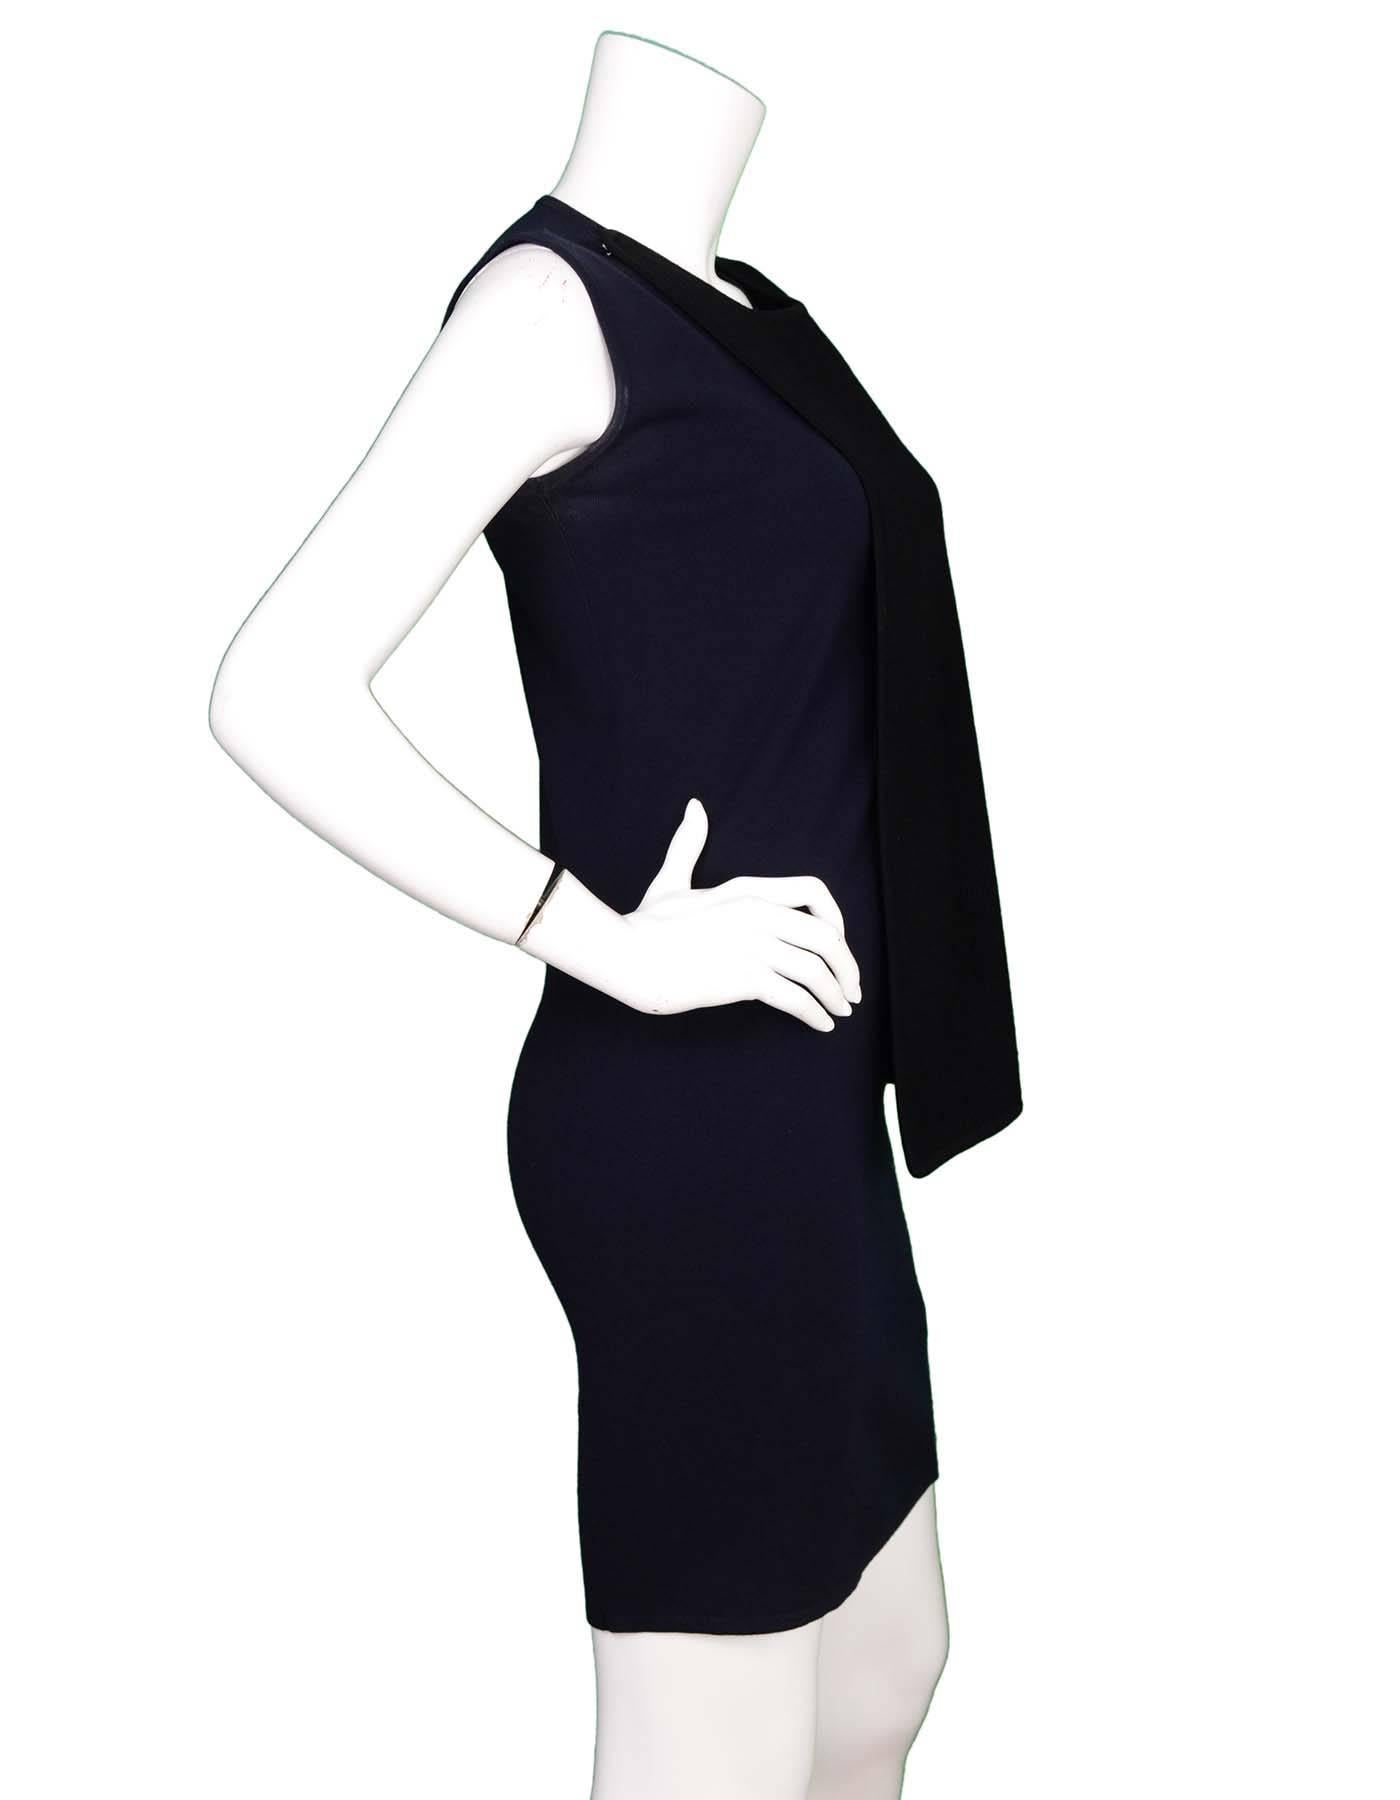 J.W. Anderson Navy and Black Panel Dress Sz XS

Made In: China
Color: Black, navy
Materials: 70% Viscose, 30% Polyester
Lining: None
Closure/Opening: Pull over
Exterior Pockets: None
Interior Pockets: None
Overall Condition: Excellent